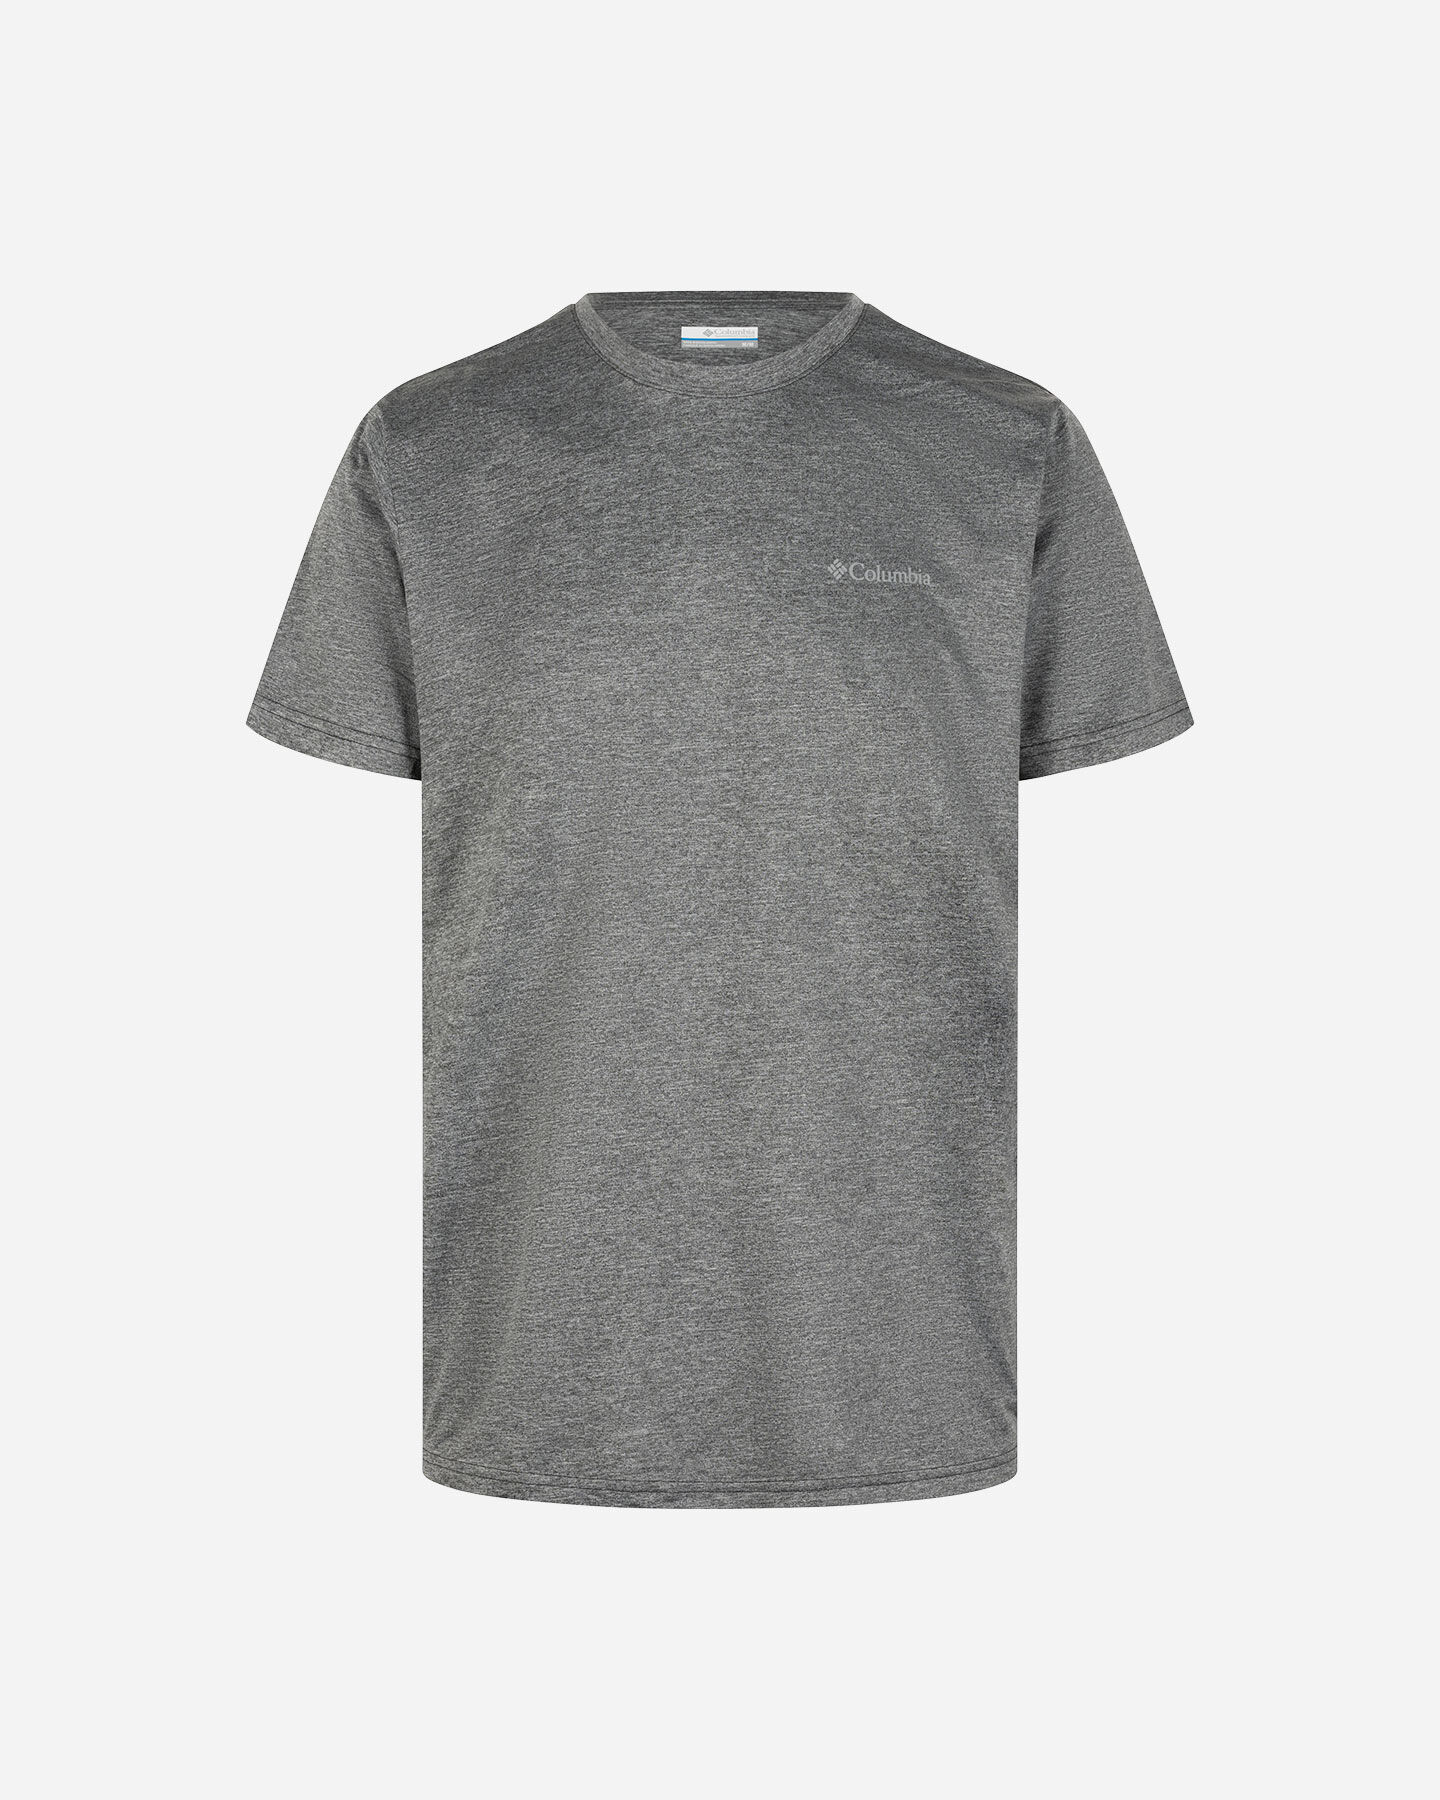  T-Shirt COLUMBIA HIKE M S5648132|011|S scatto 0